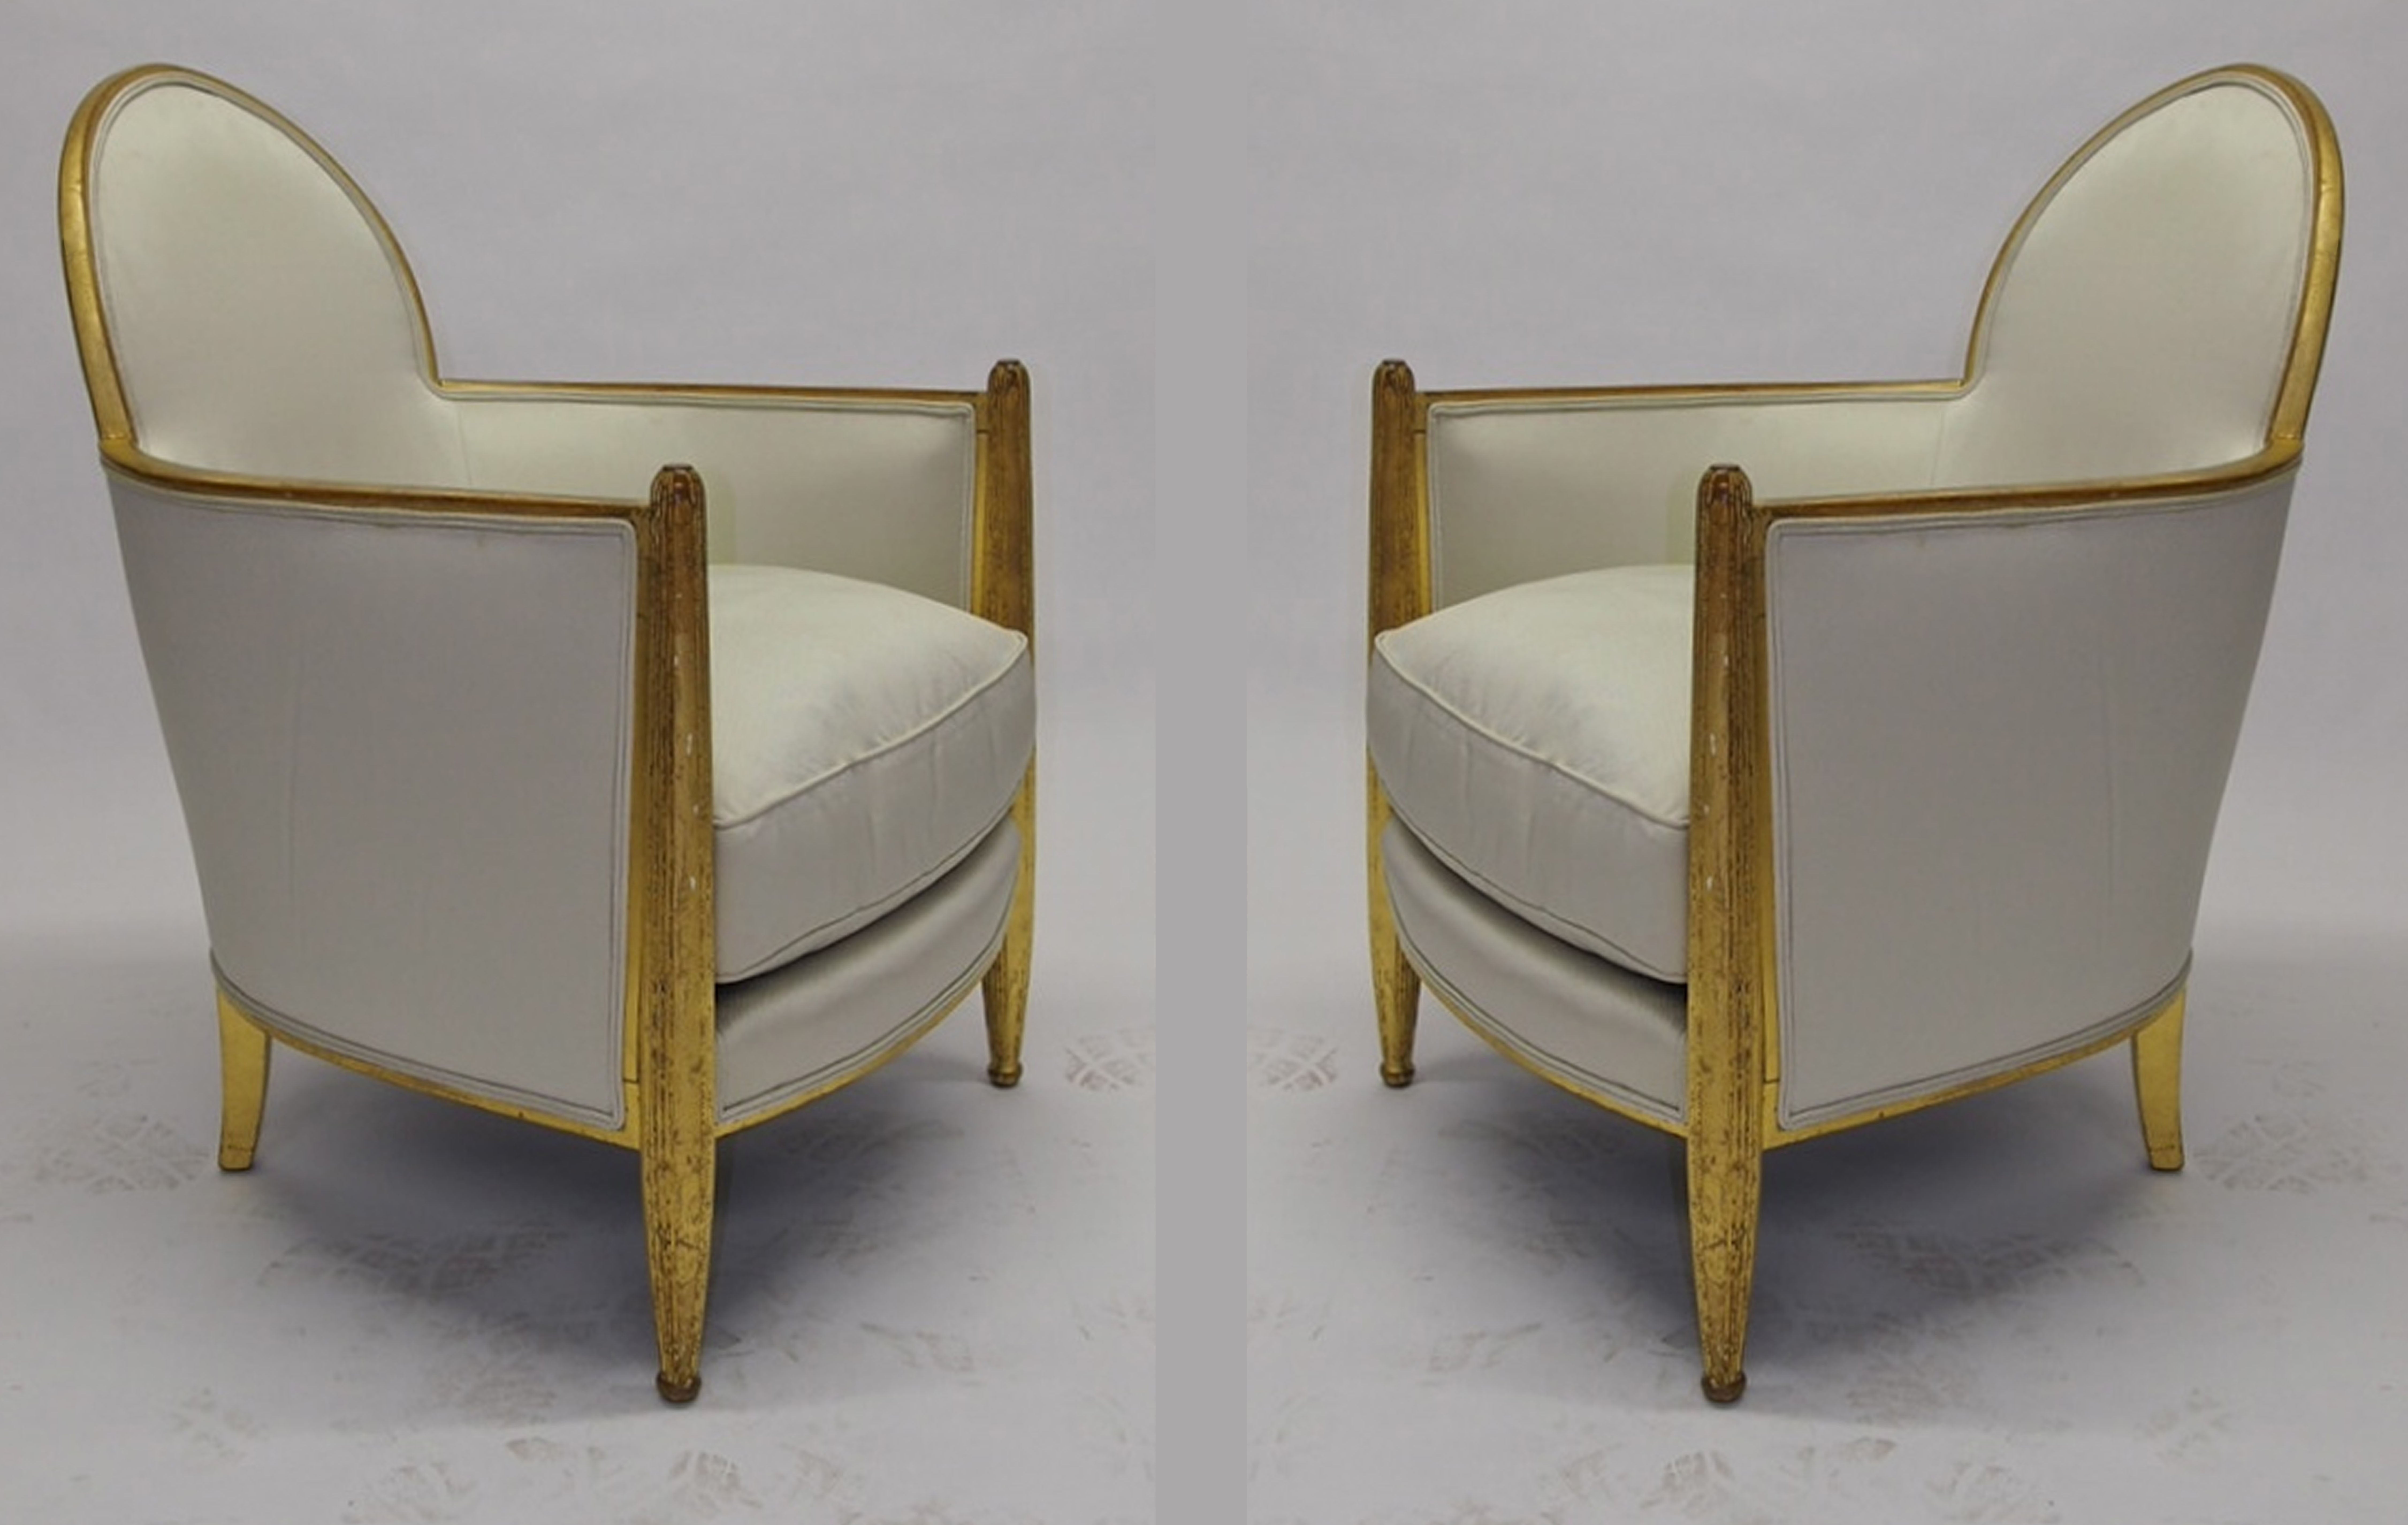 Pair of Chairs by Paul Follot French Deco circa 1930